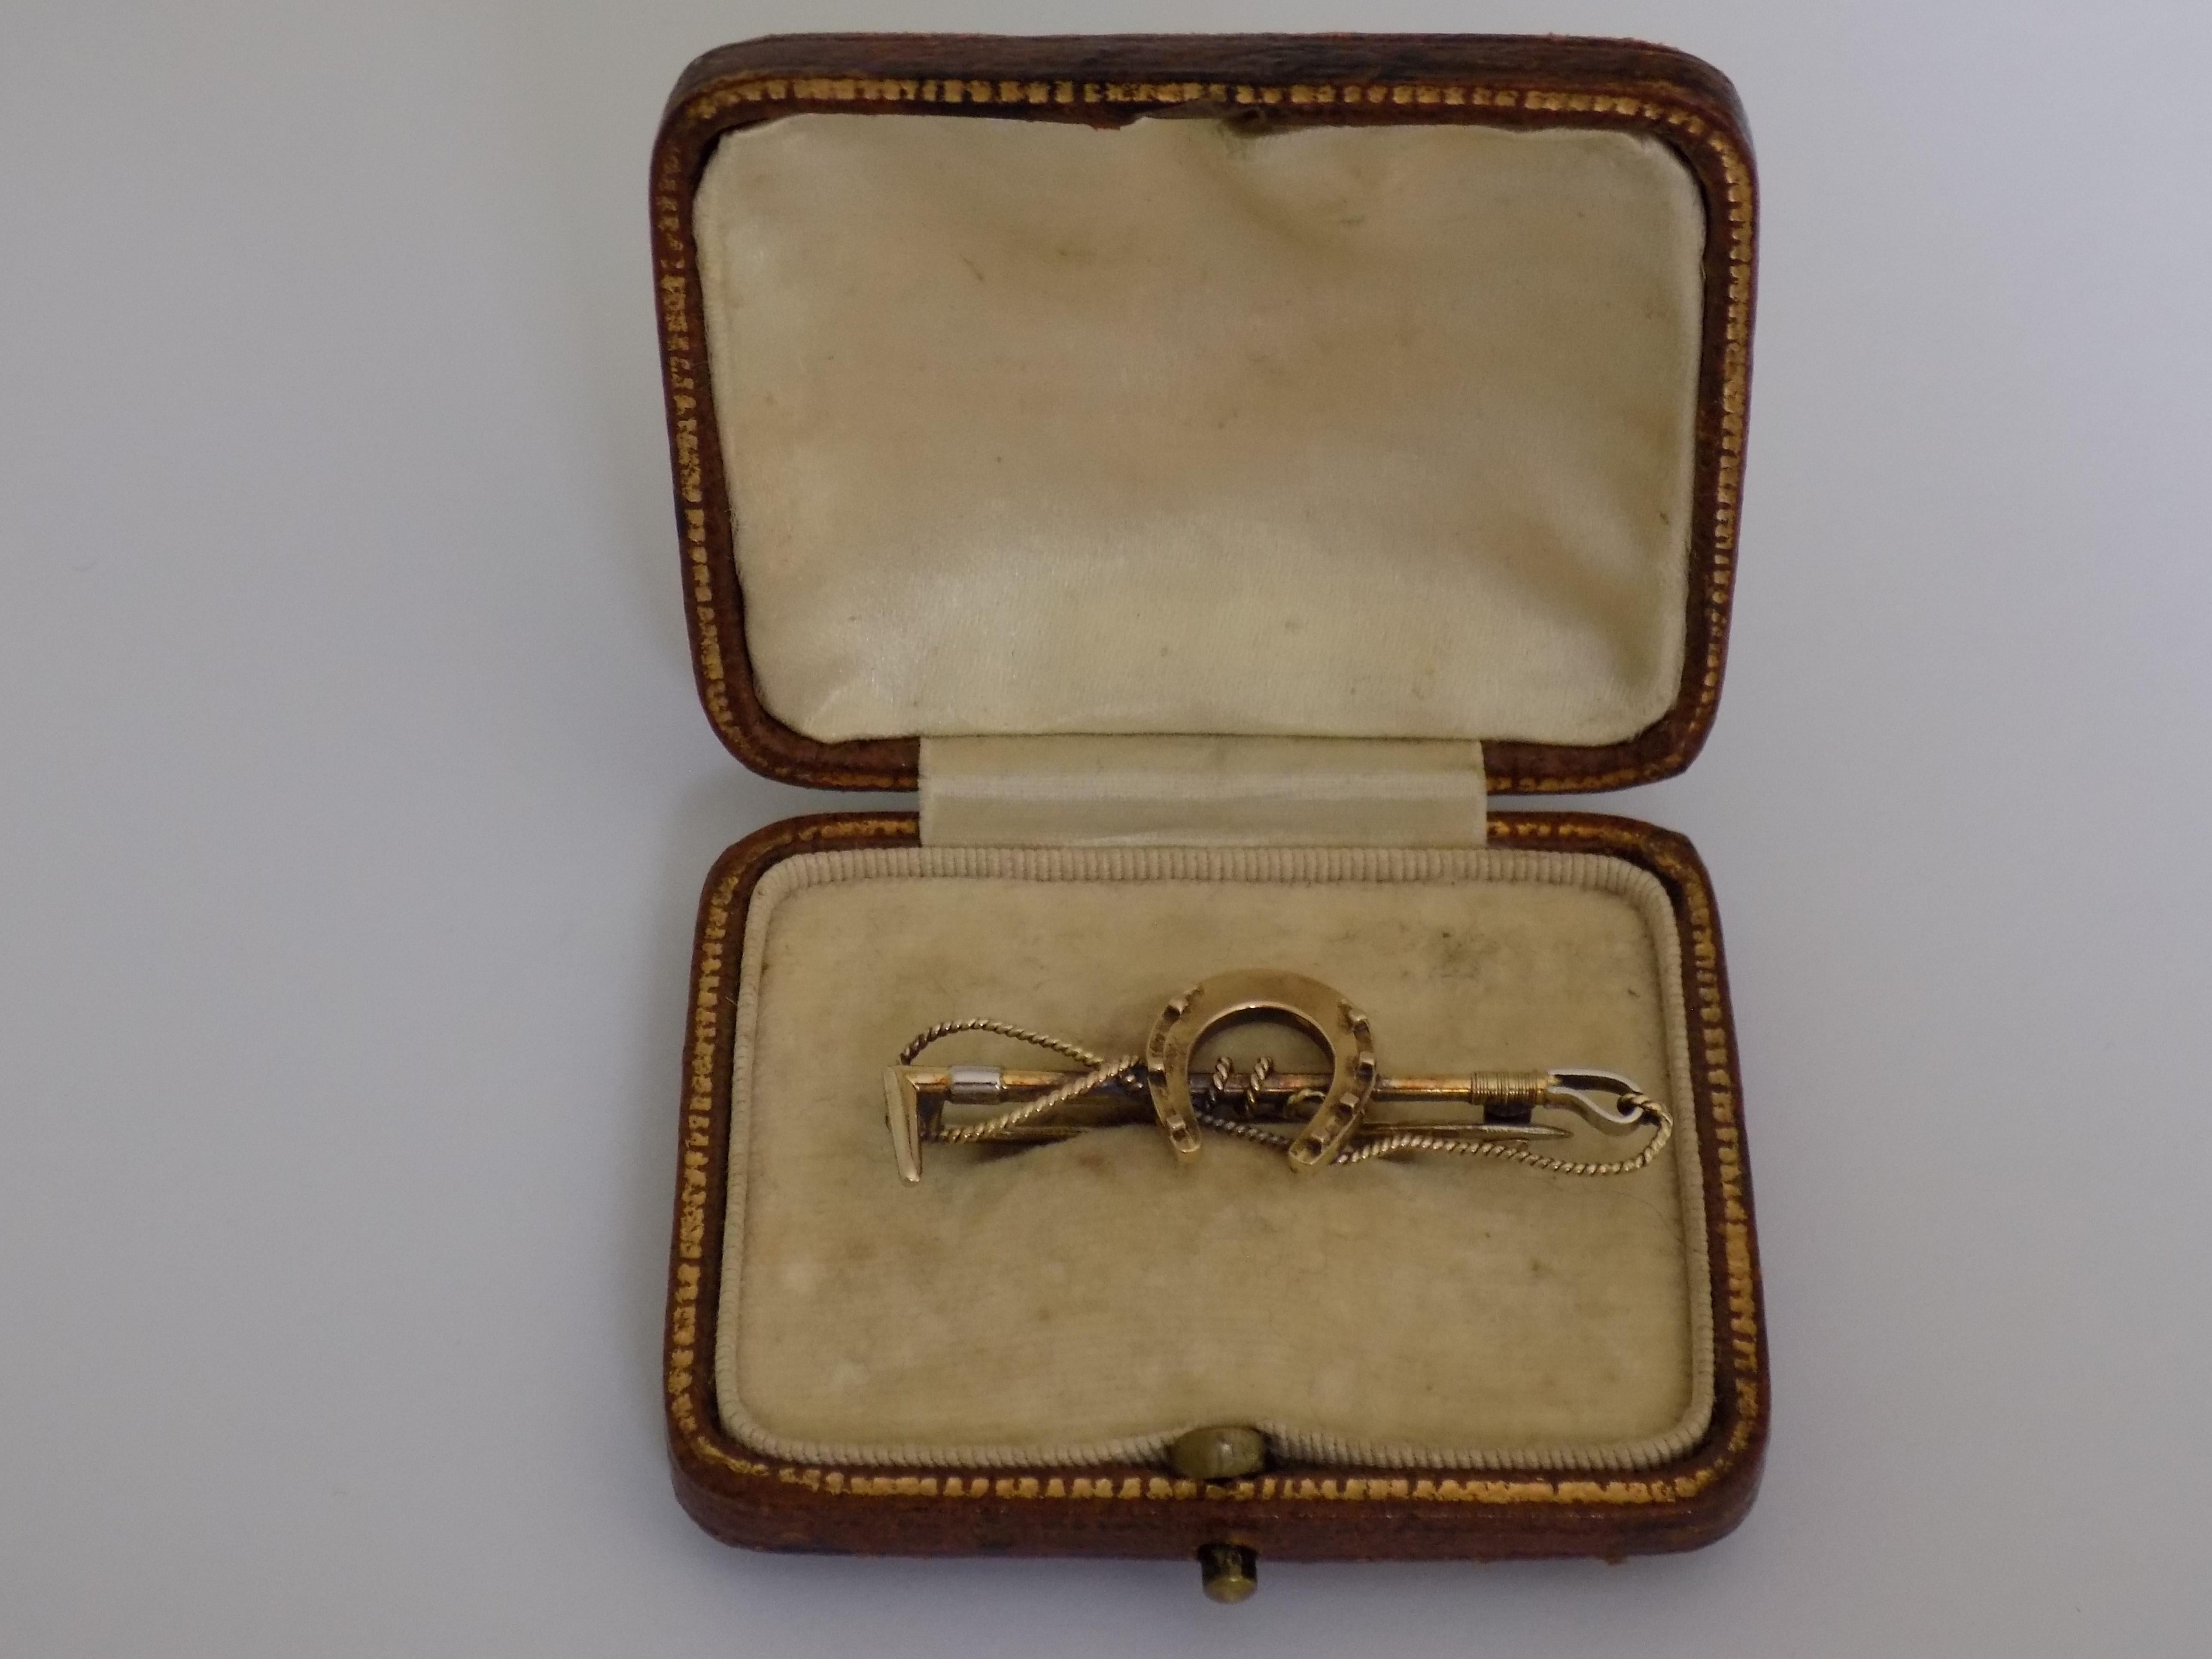 Edwardian 18 Karat Gold Horseshoe Riding Crop Pin Brooch In Good Condition For Sale In Boston, Lincolnshire